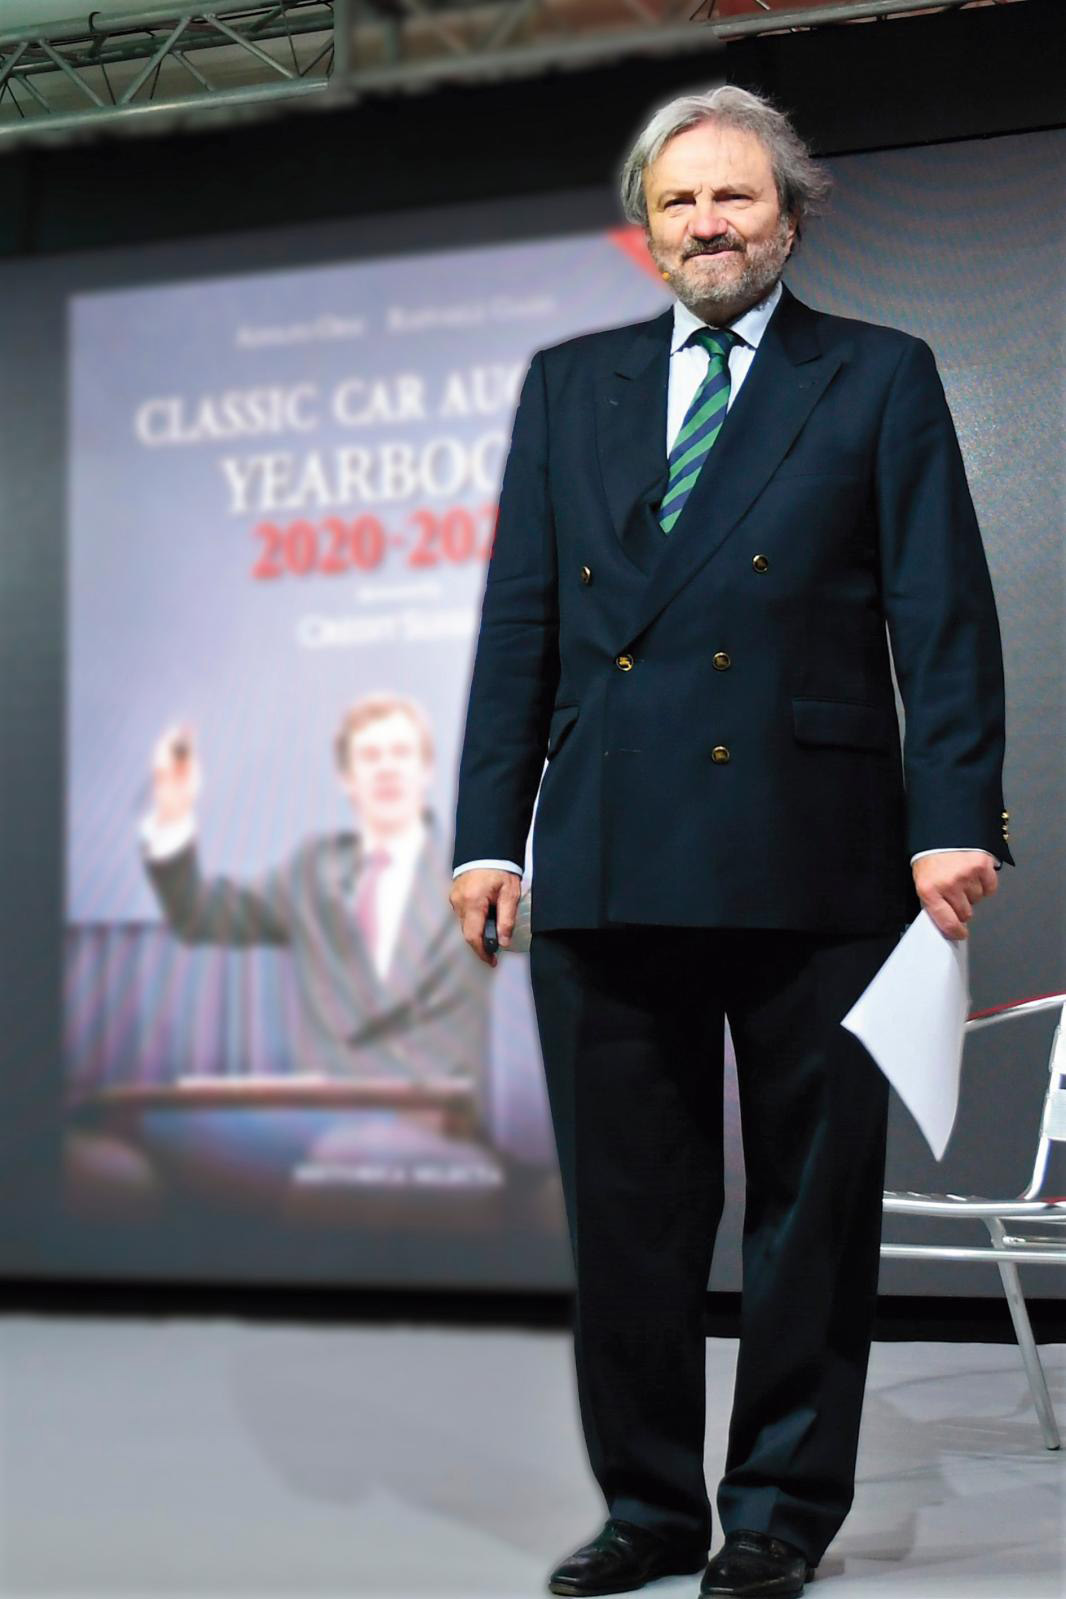 Adolfo Orsi, Author of Classic Car Auction Yearbook: The Automotive Bible